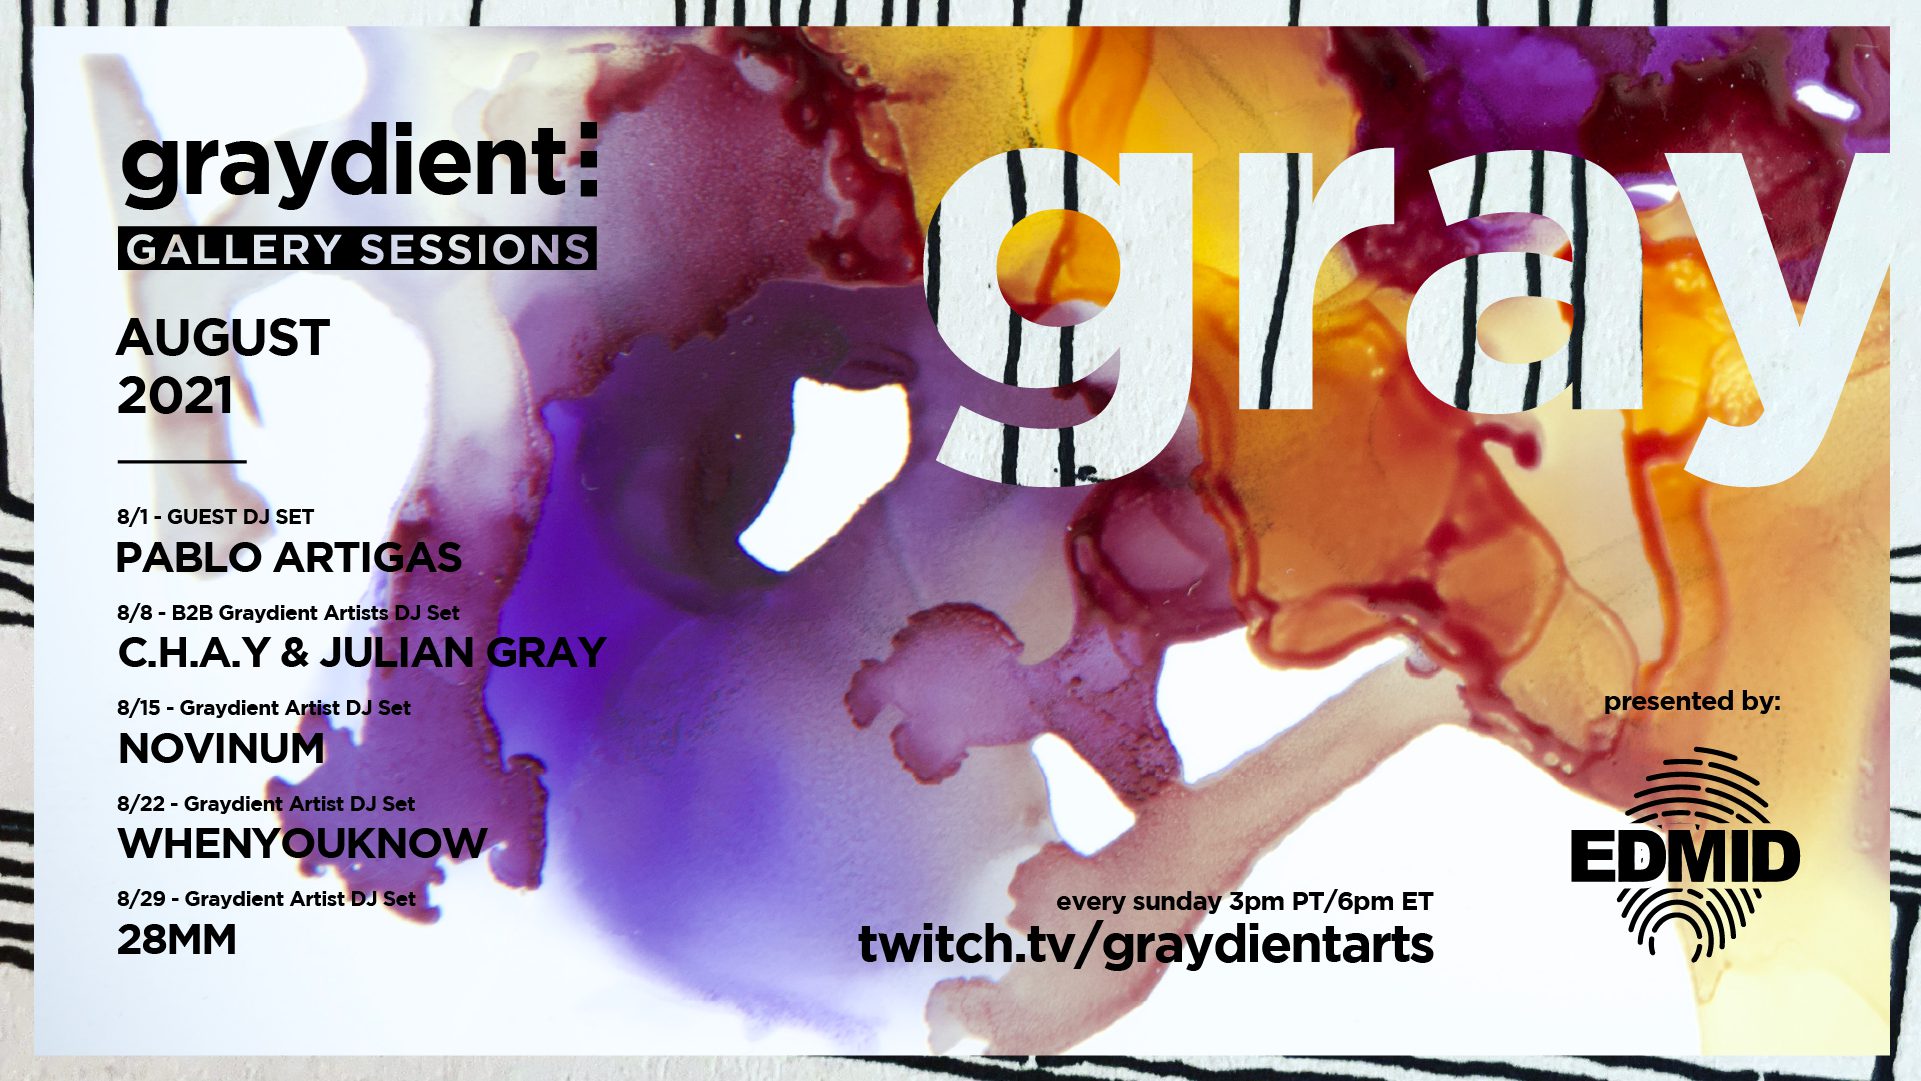 Graydient Collective Gallery Sessions August Lineup